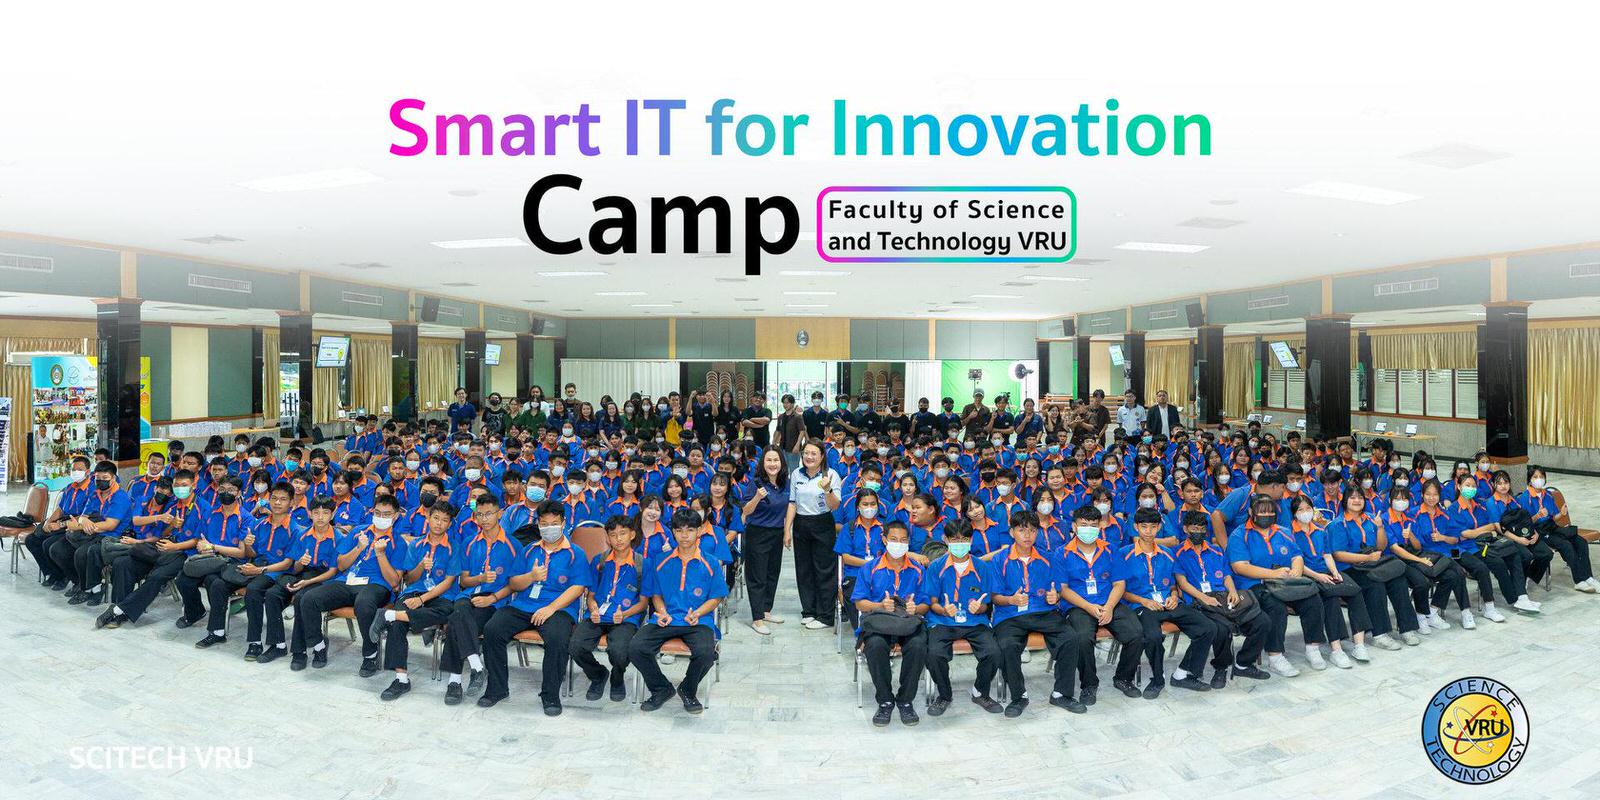 Smart IT for Innovation Camp Faculty of Science and Technology VRU